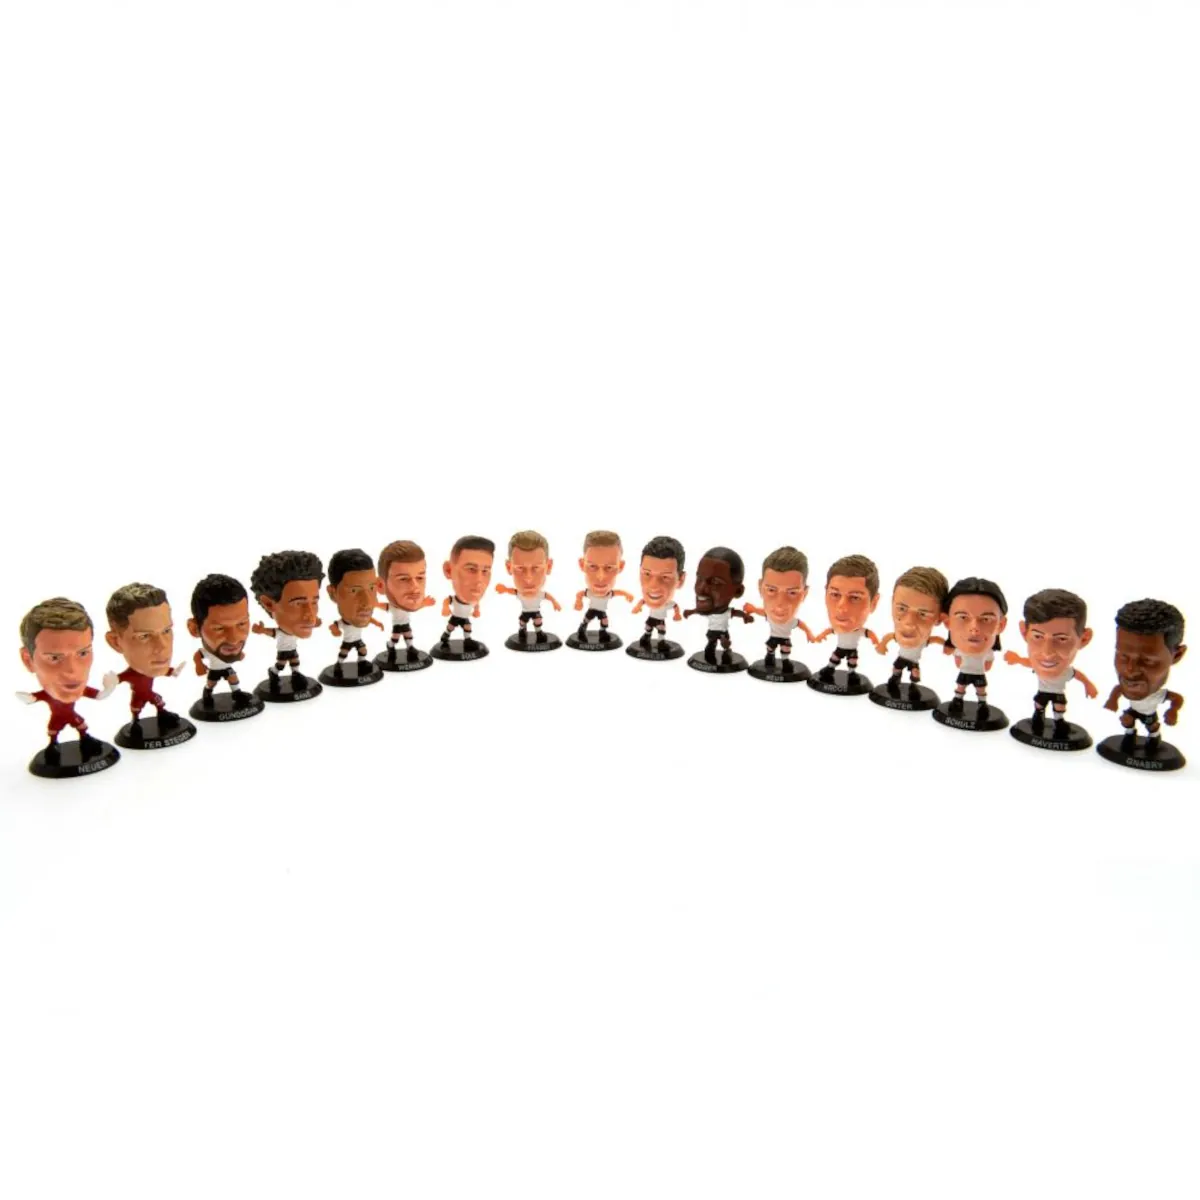 173460 Germany SoccerStarz 17 Player Team Pack 2020 Season Collectable Figures